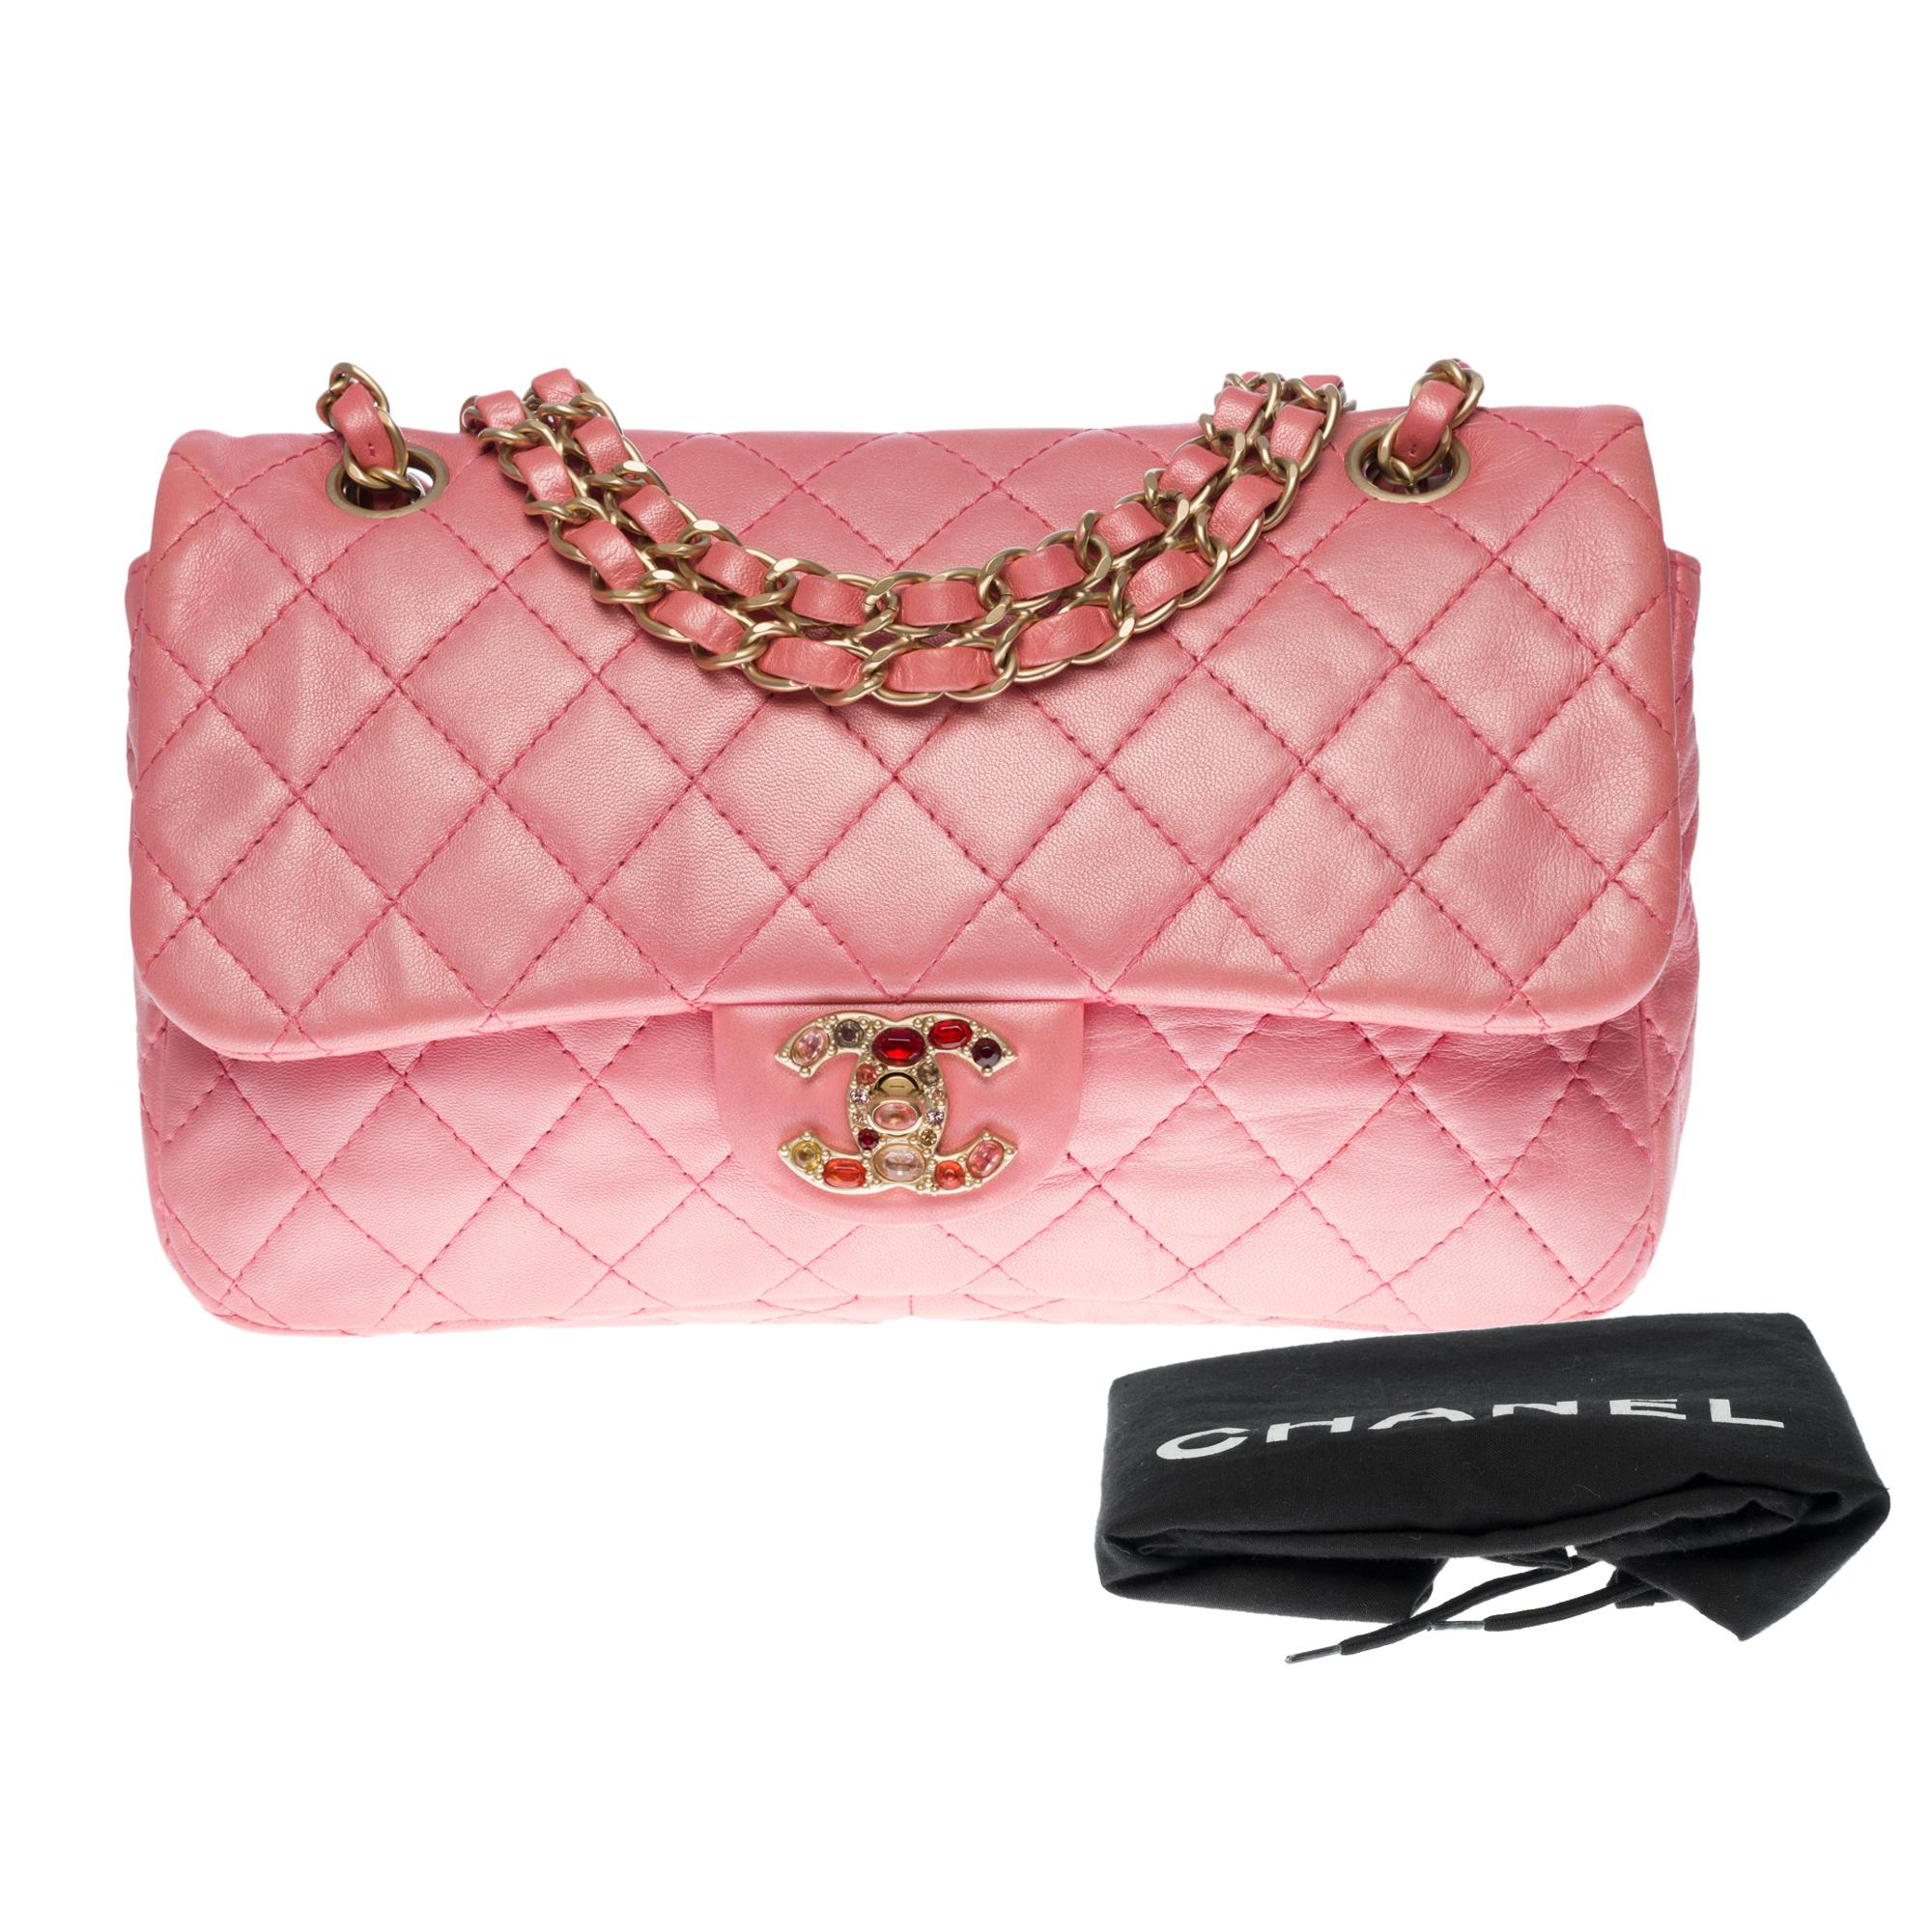 Limited edition Chanel Classic shoulder bag in metallic Pink quilted leather, GHW 5